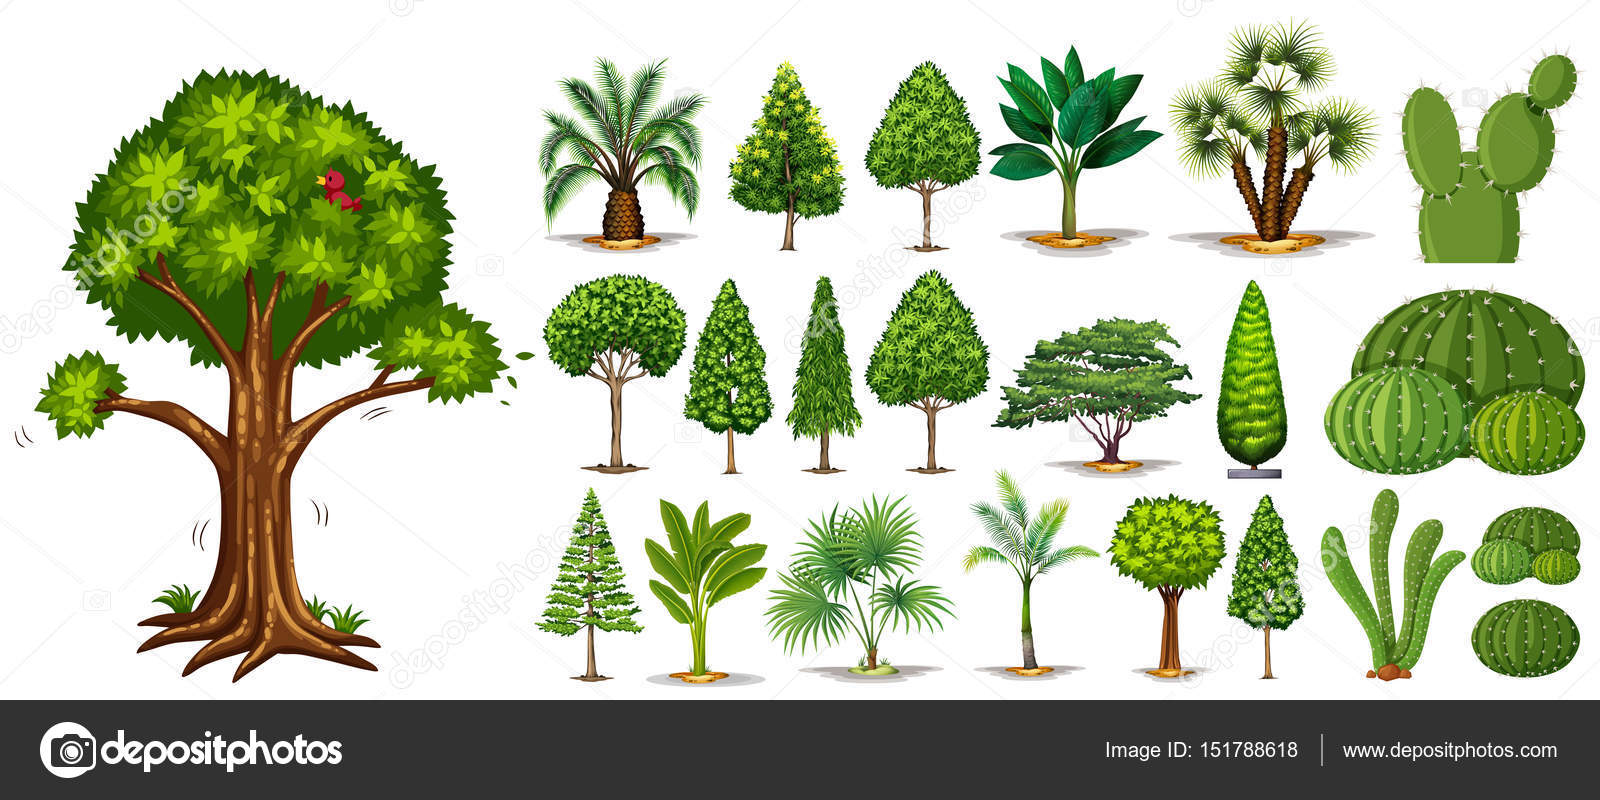 types of trees with pictures and information